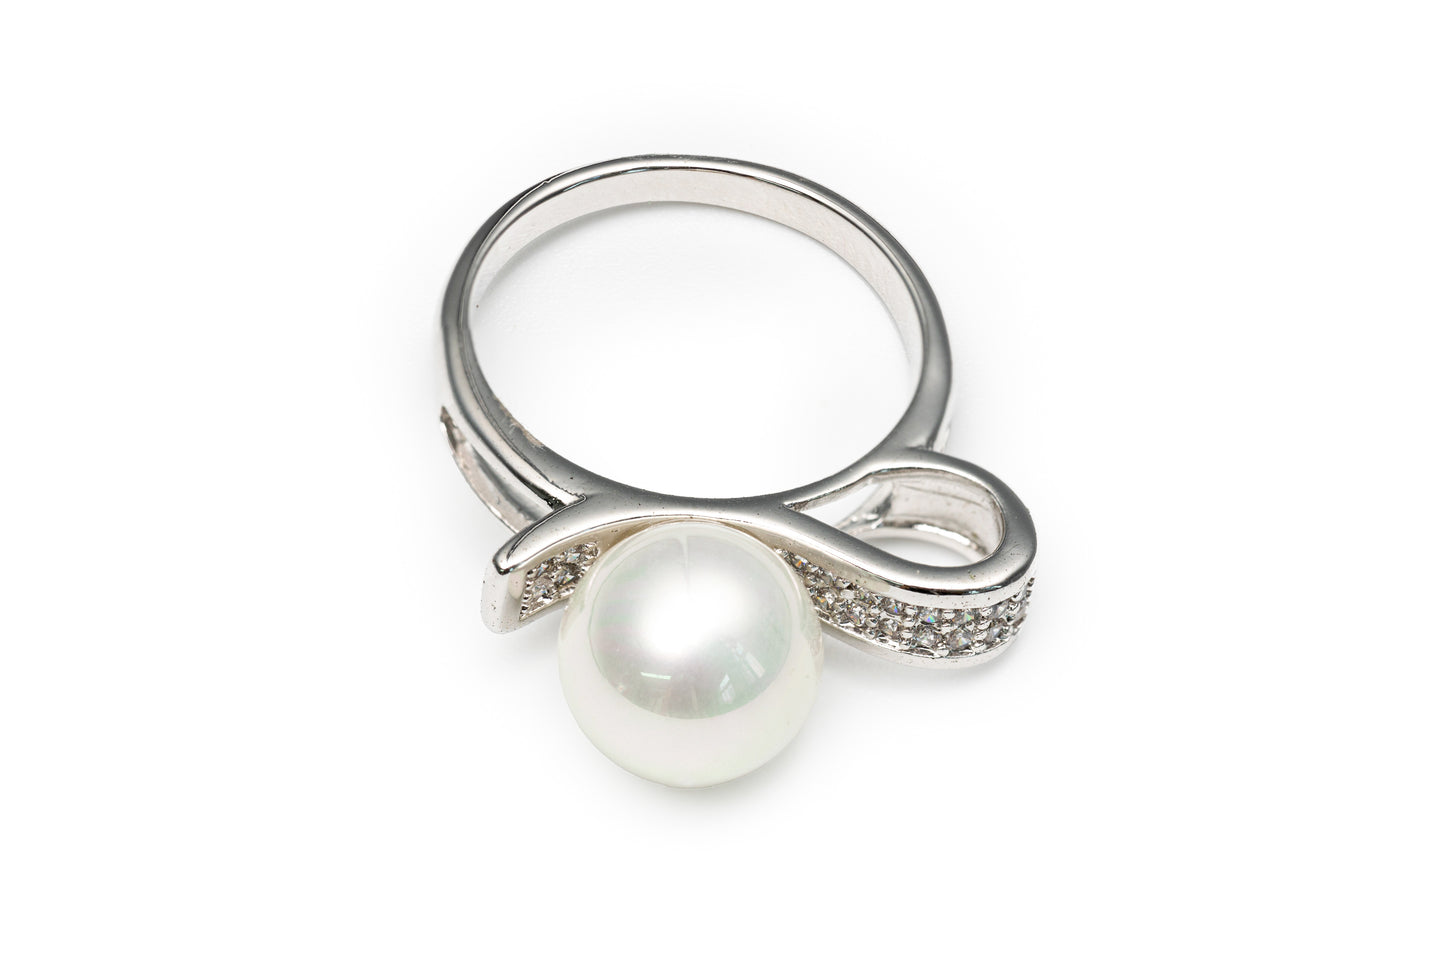 Silver Round Ring for Women